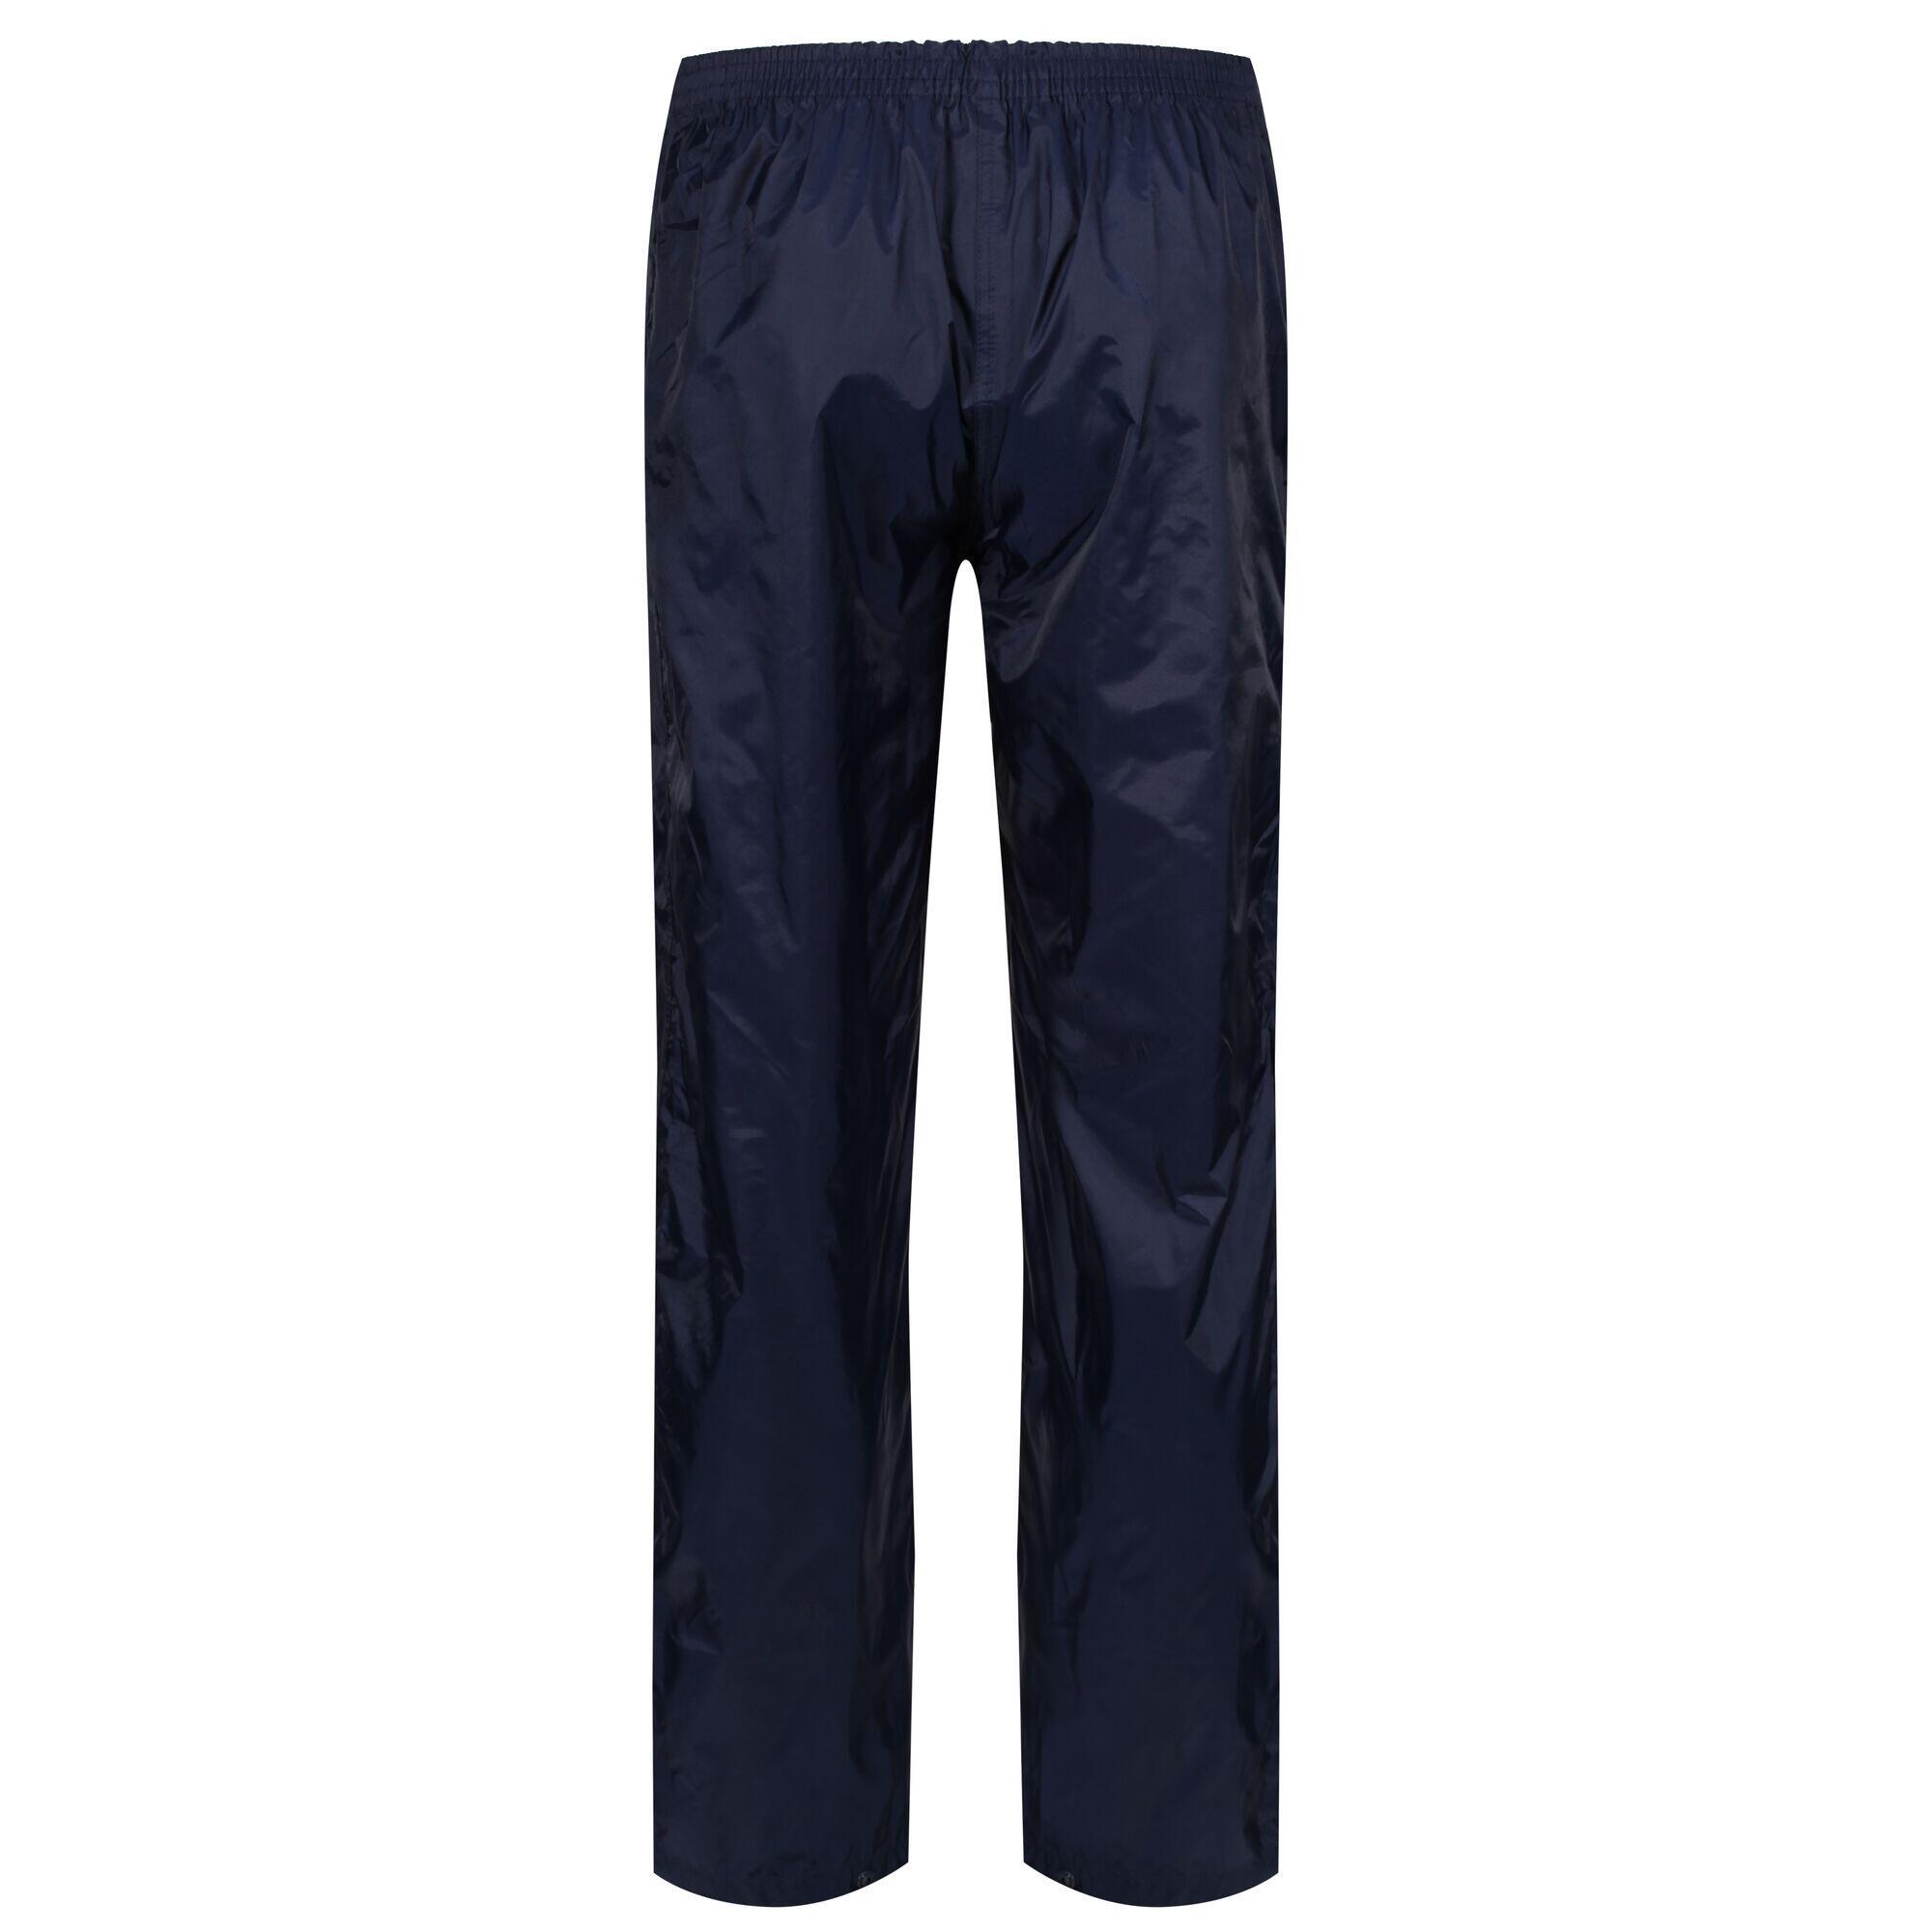 Pack-It Men's Hiking Overtrousers 7/7